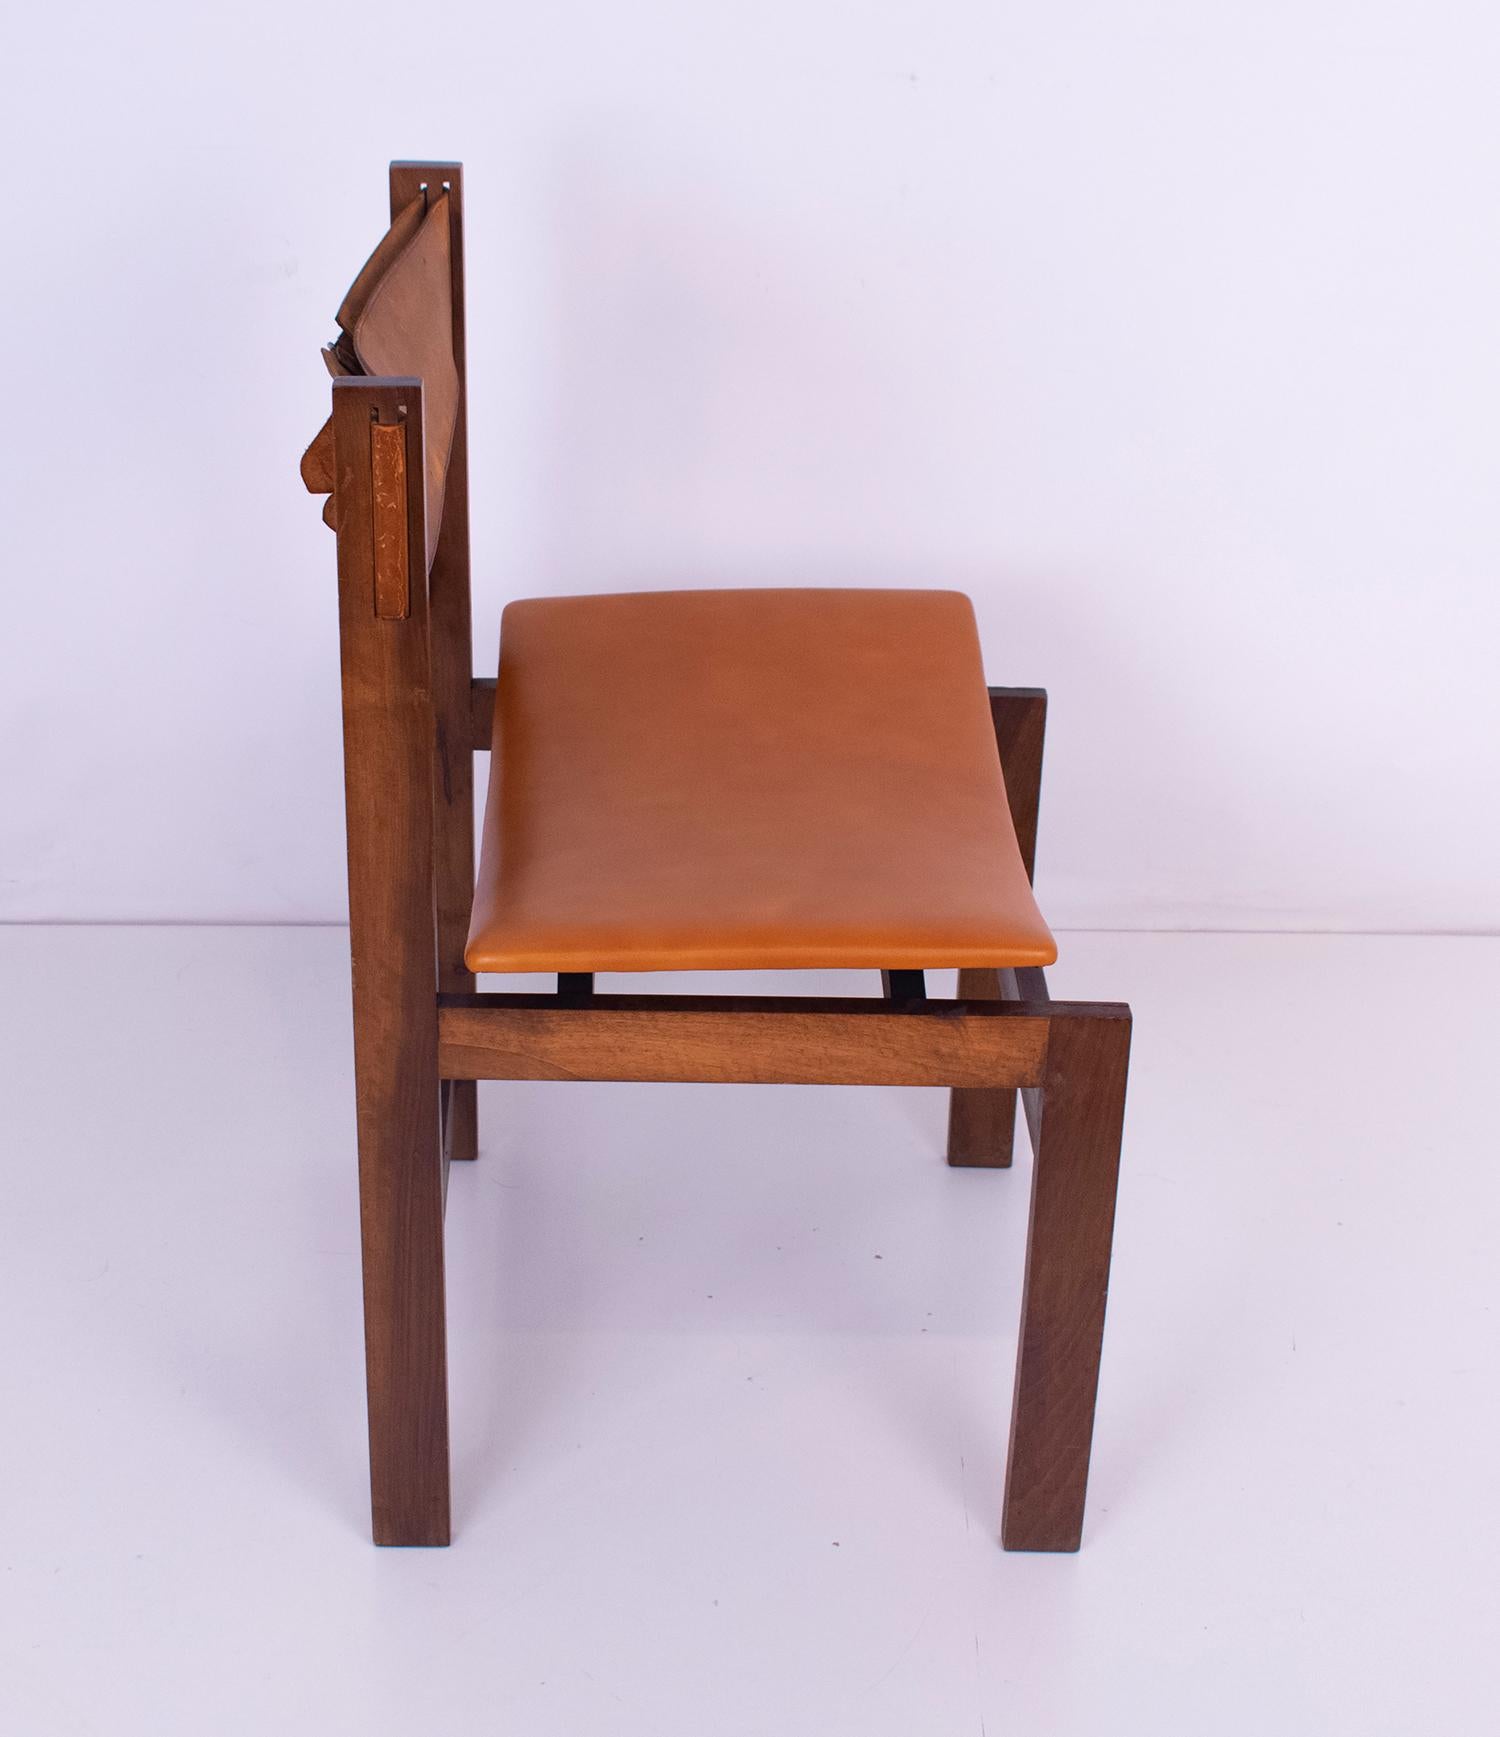 Rationalist style chair,

wooden structure, seat upholstered again in leather and backrest with its original leather.

Of unknown author although it is probably an architect's design.
Quite rectilinear chair and in contrast the curved